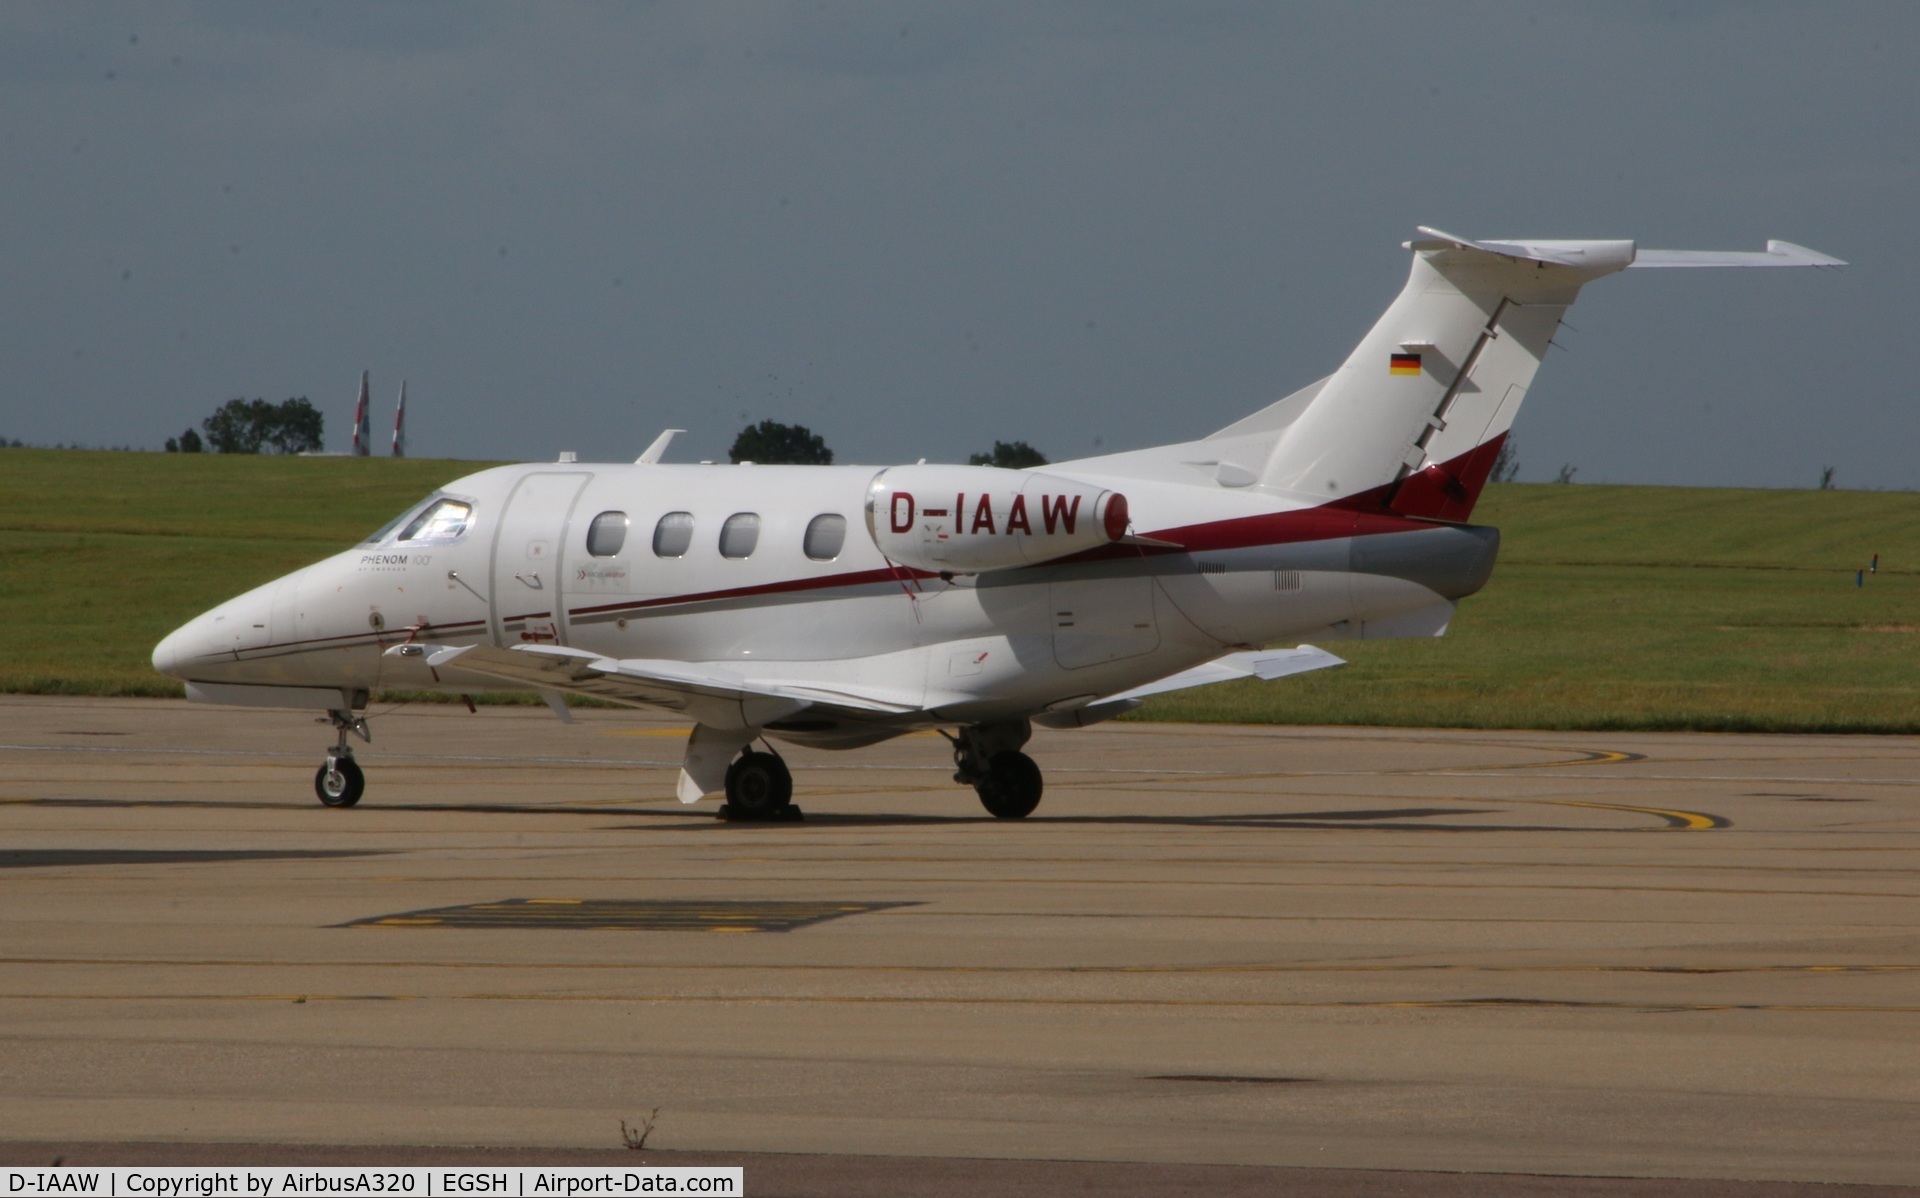 D-IAAW, 2011 Embraer EMB-500 Phenom 100 C/N 50000245, Parked at Saxons Norwich